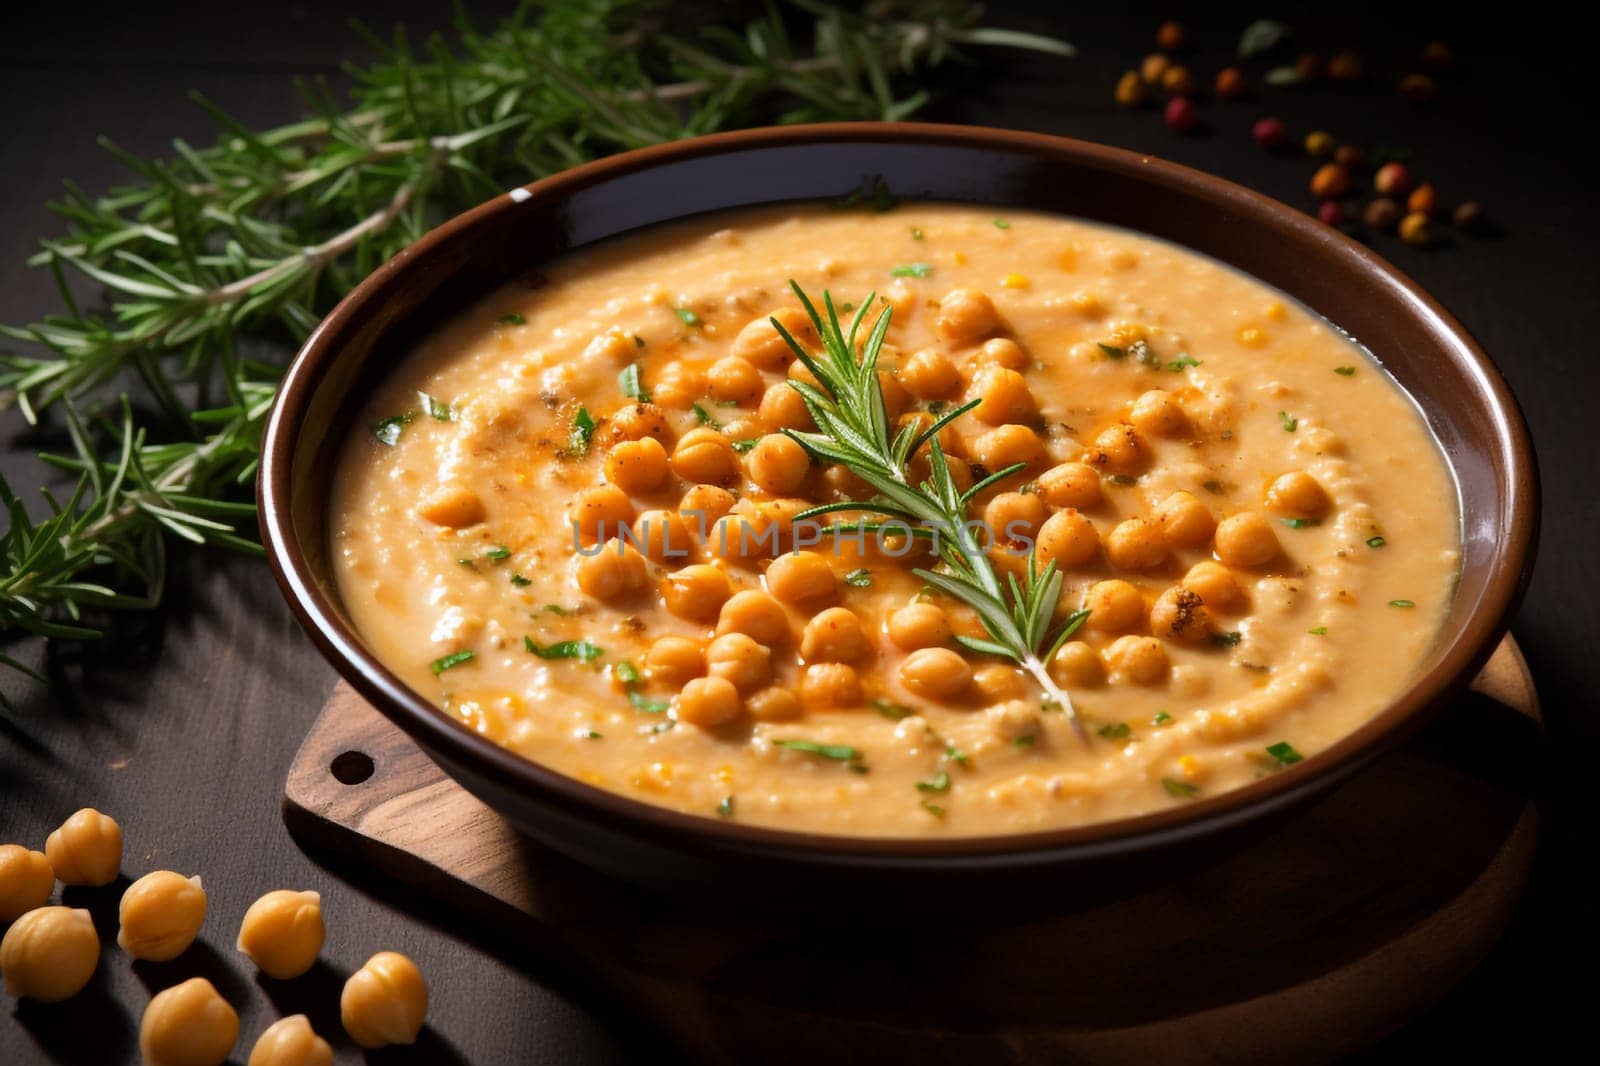 Chickpea Soup a classic of Umbrian cuisine and the epitome of Italian comfort food by Ciorba